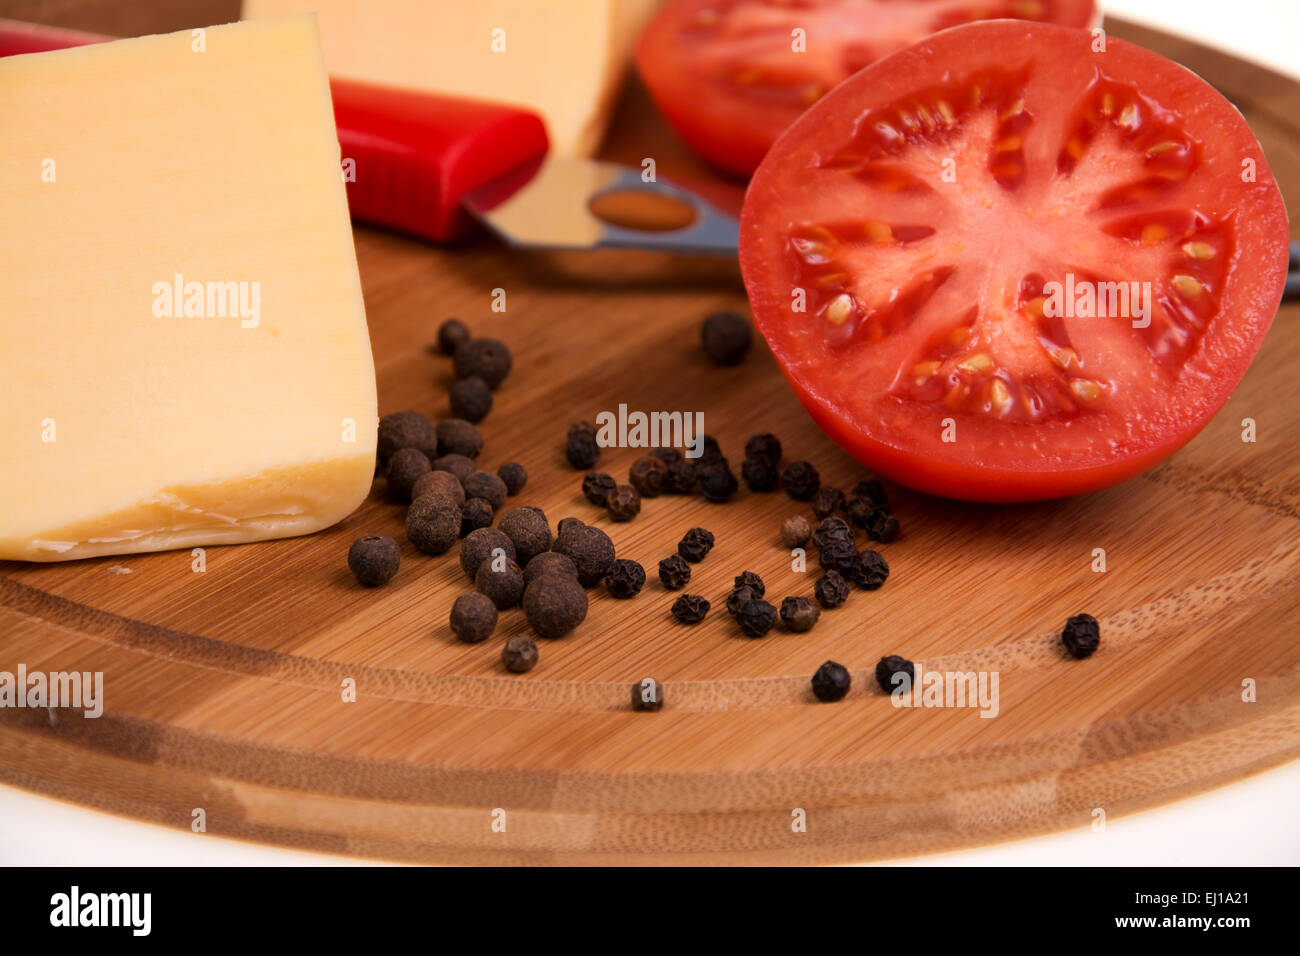 Pepper tomato and cheese on the kitchen board Stock Photo